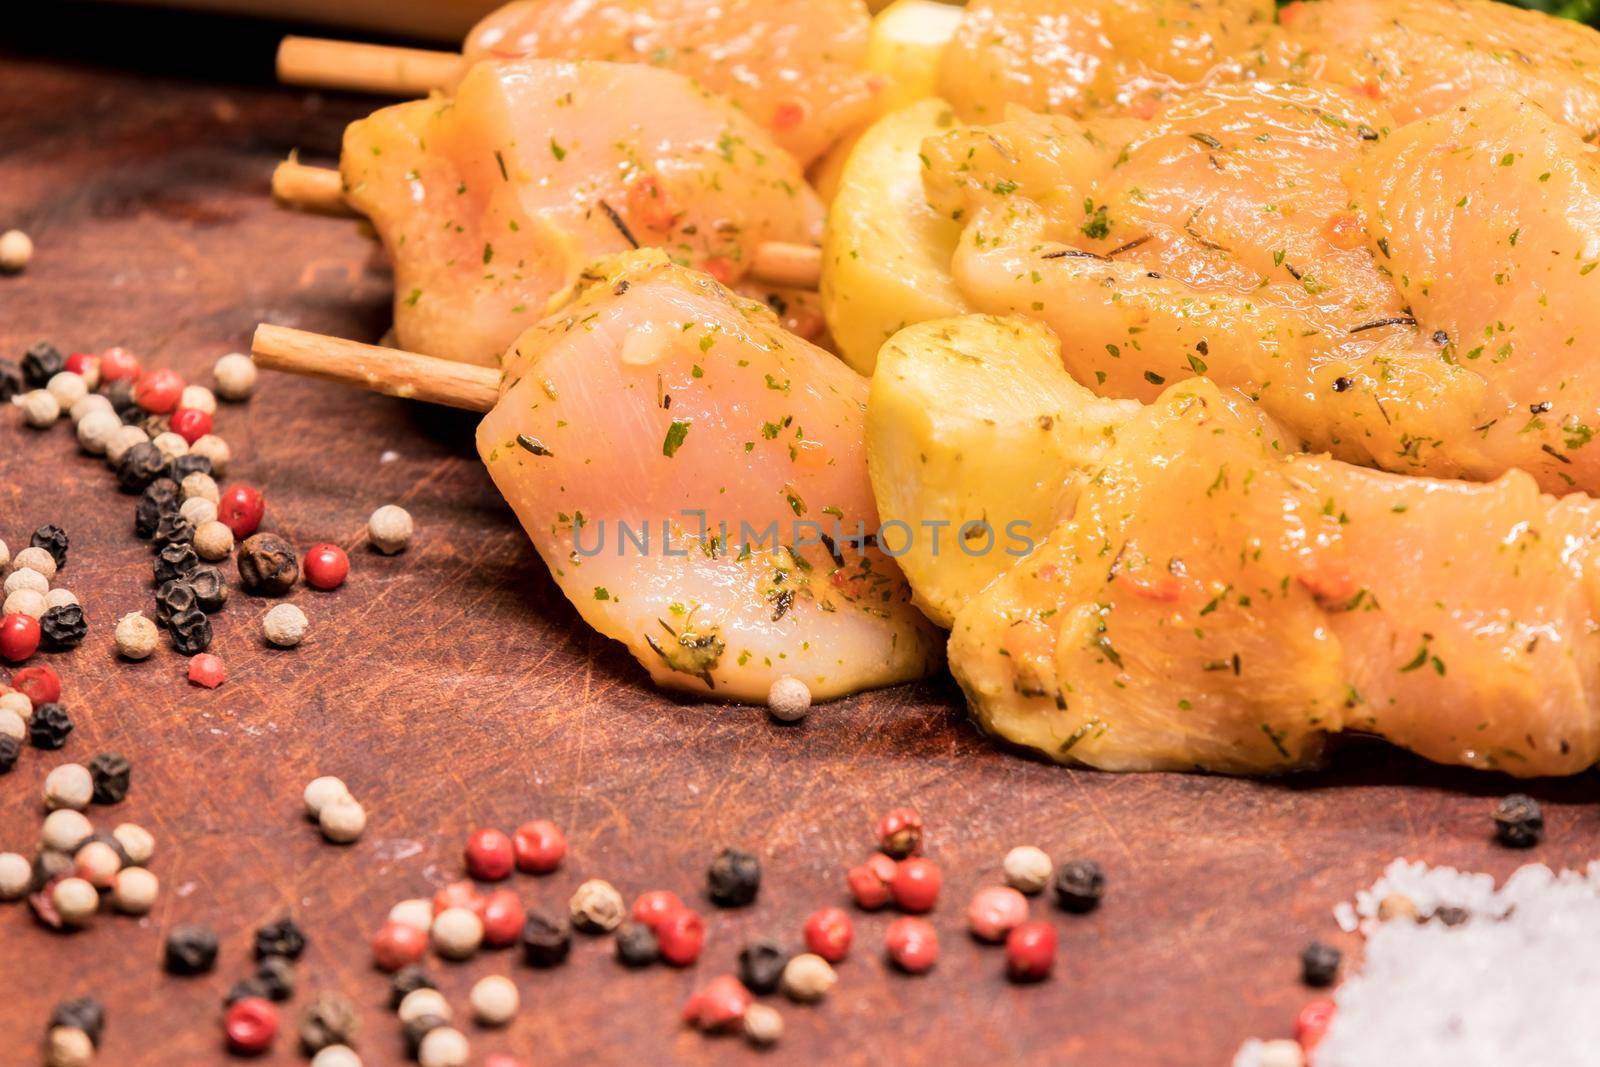 raw chicken skewers marinated with lemon on a wooden board